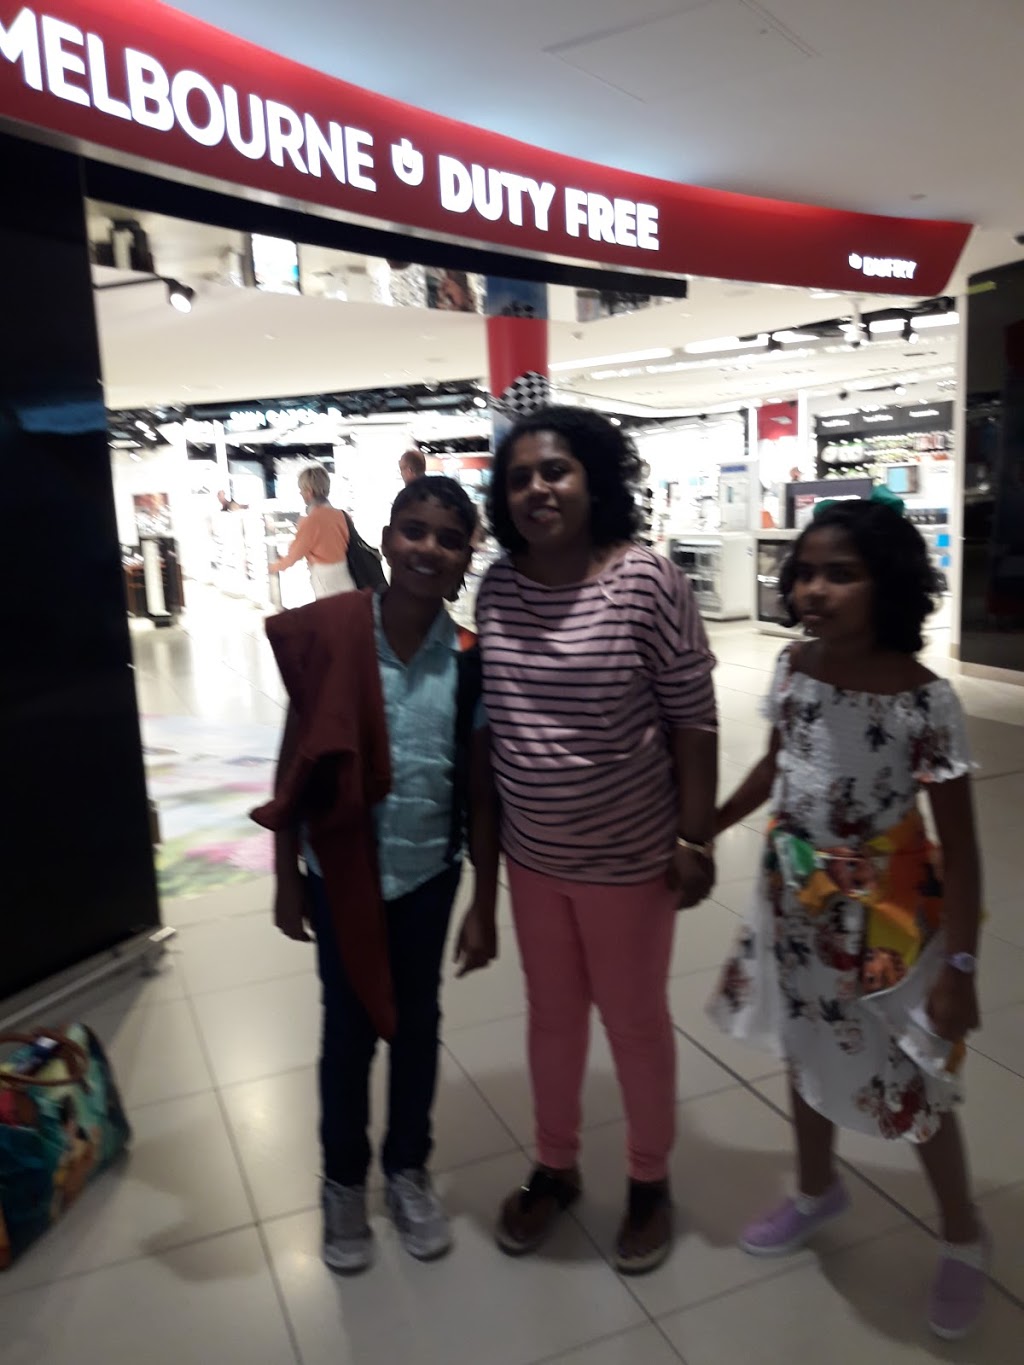 Dufry Duty Free Confectionery | T2, Melbourne Airport, VIC 3045, Australia